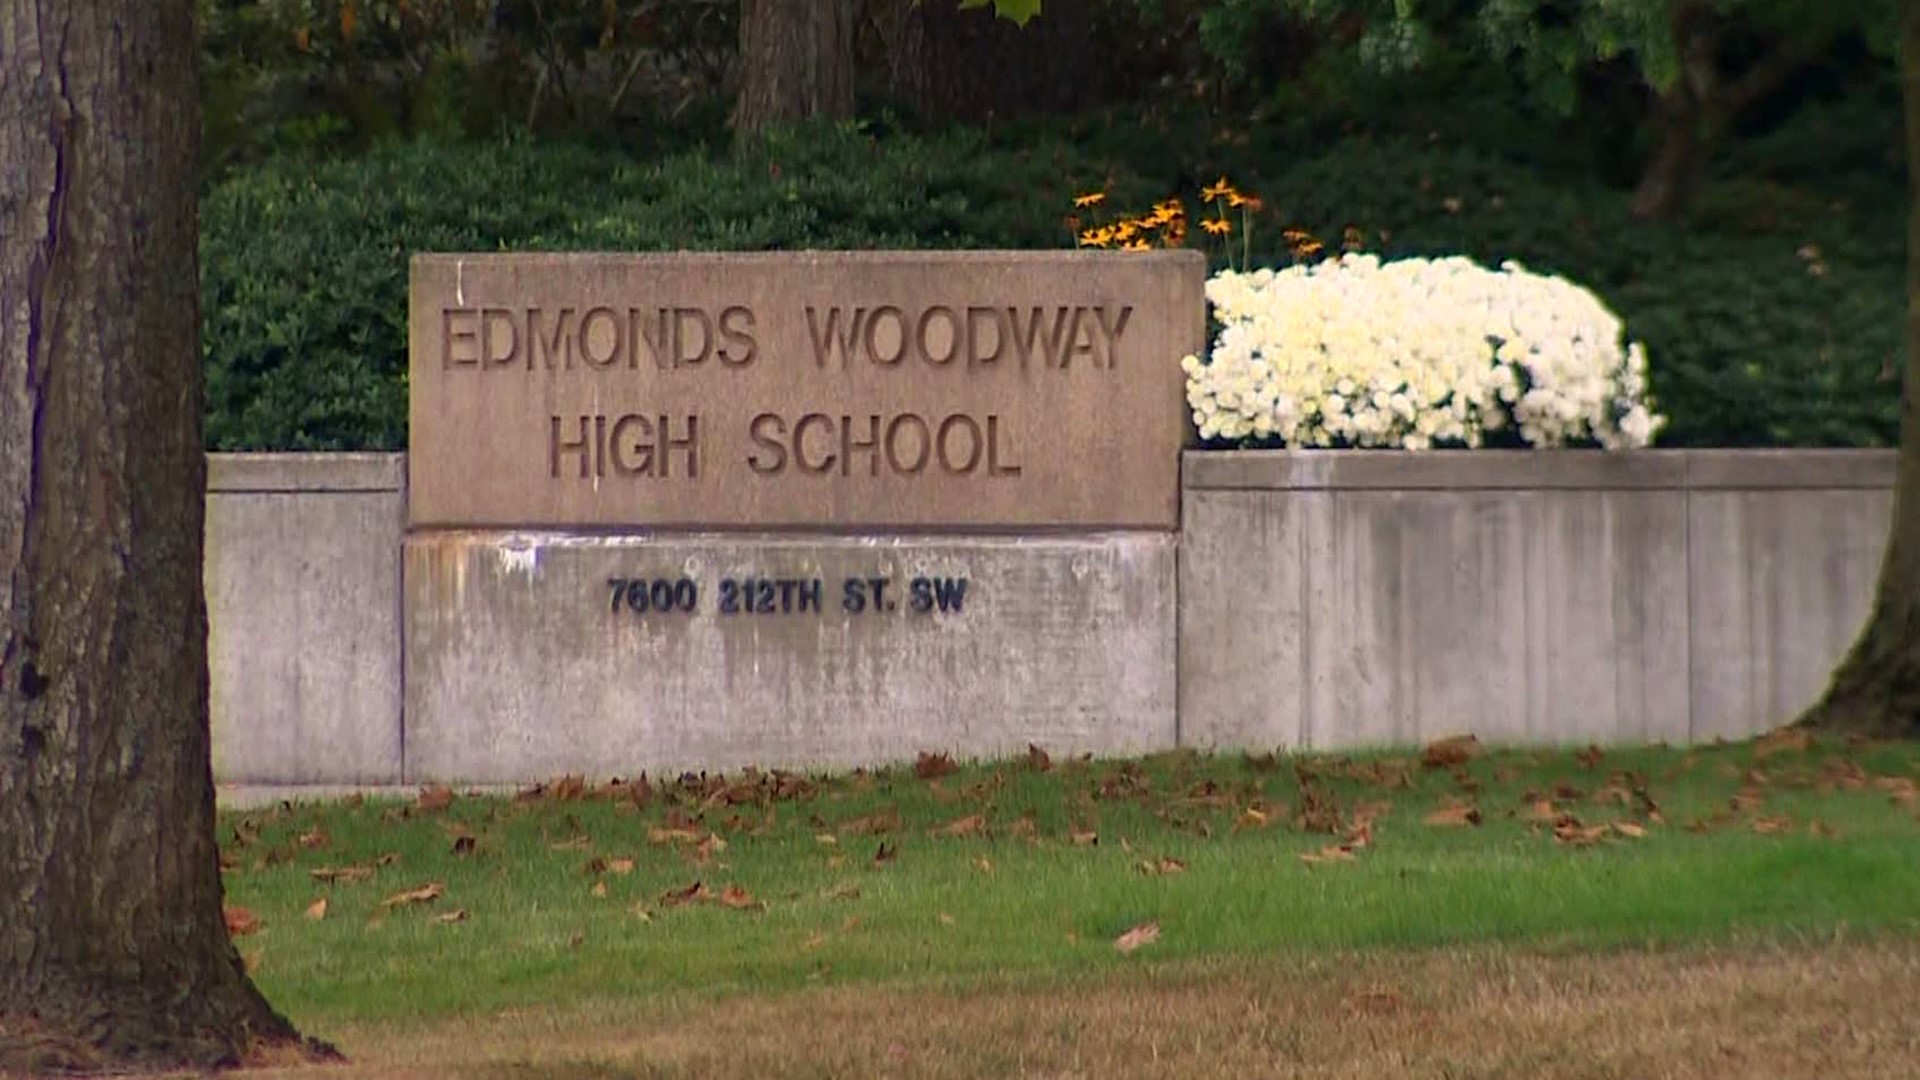 A 15-year-old Edmonds-Woodway High School student was arrested Thursday afternoon after bringing a loaded handgun to school.